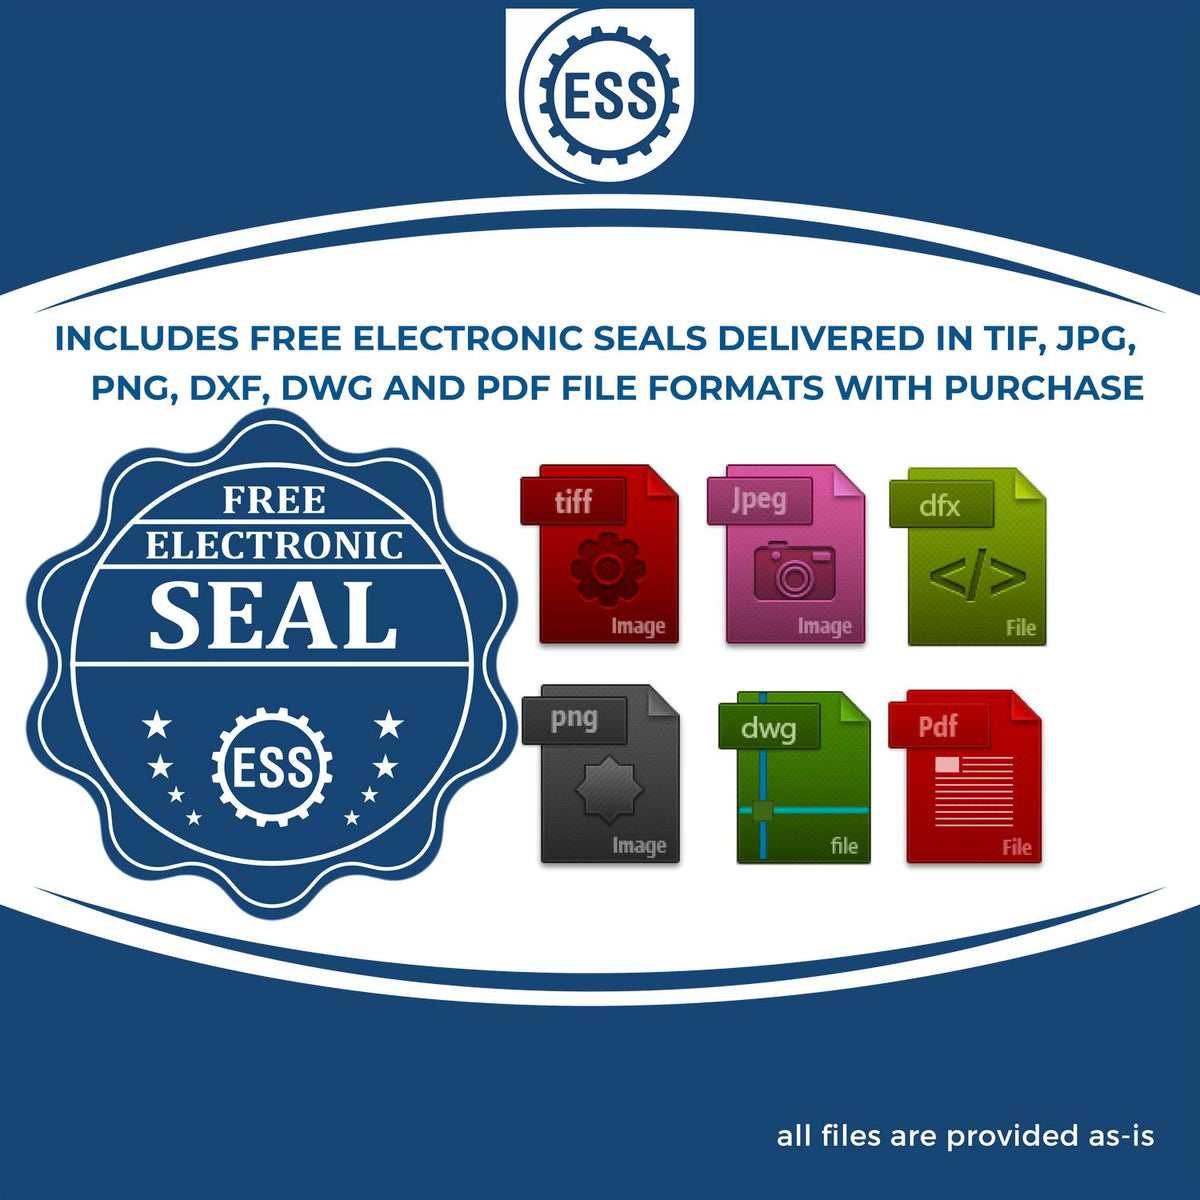 An infographic for the free electronic seal for the Handheld New Mexico Professional Geologist Embosser illustrating the different file type icons such as DXF, DWG, TIF, JPG and PNG.